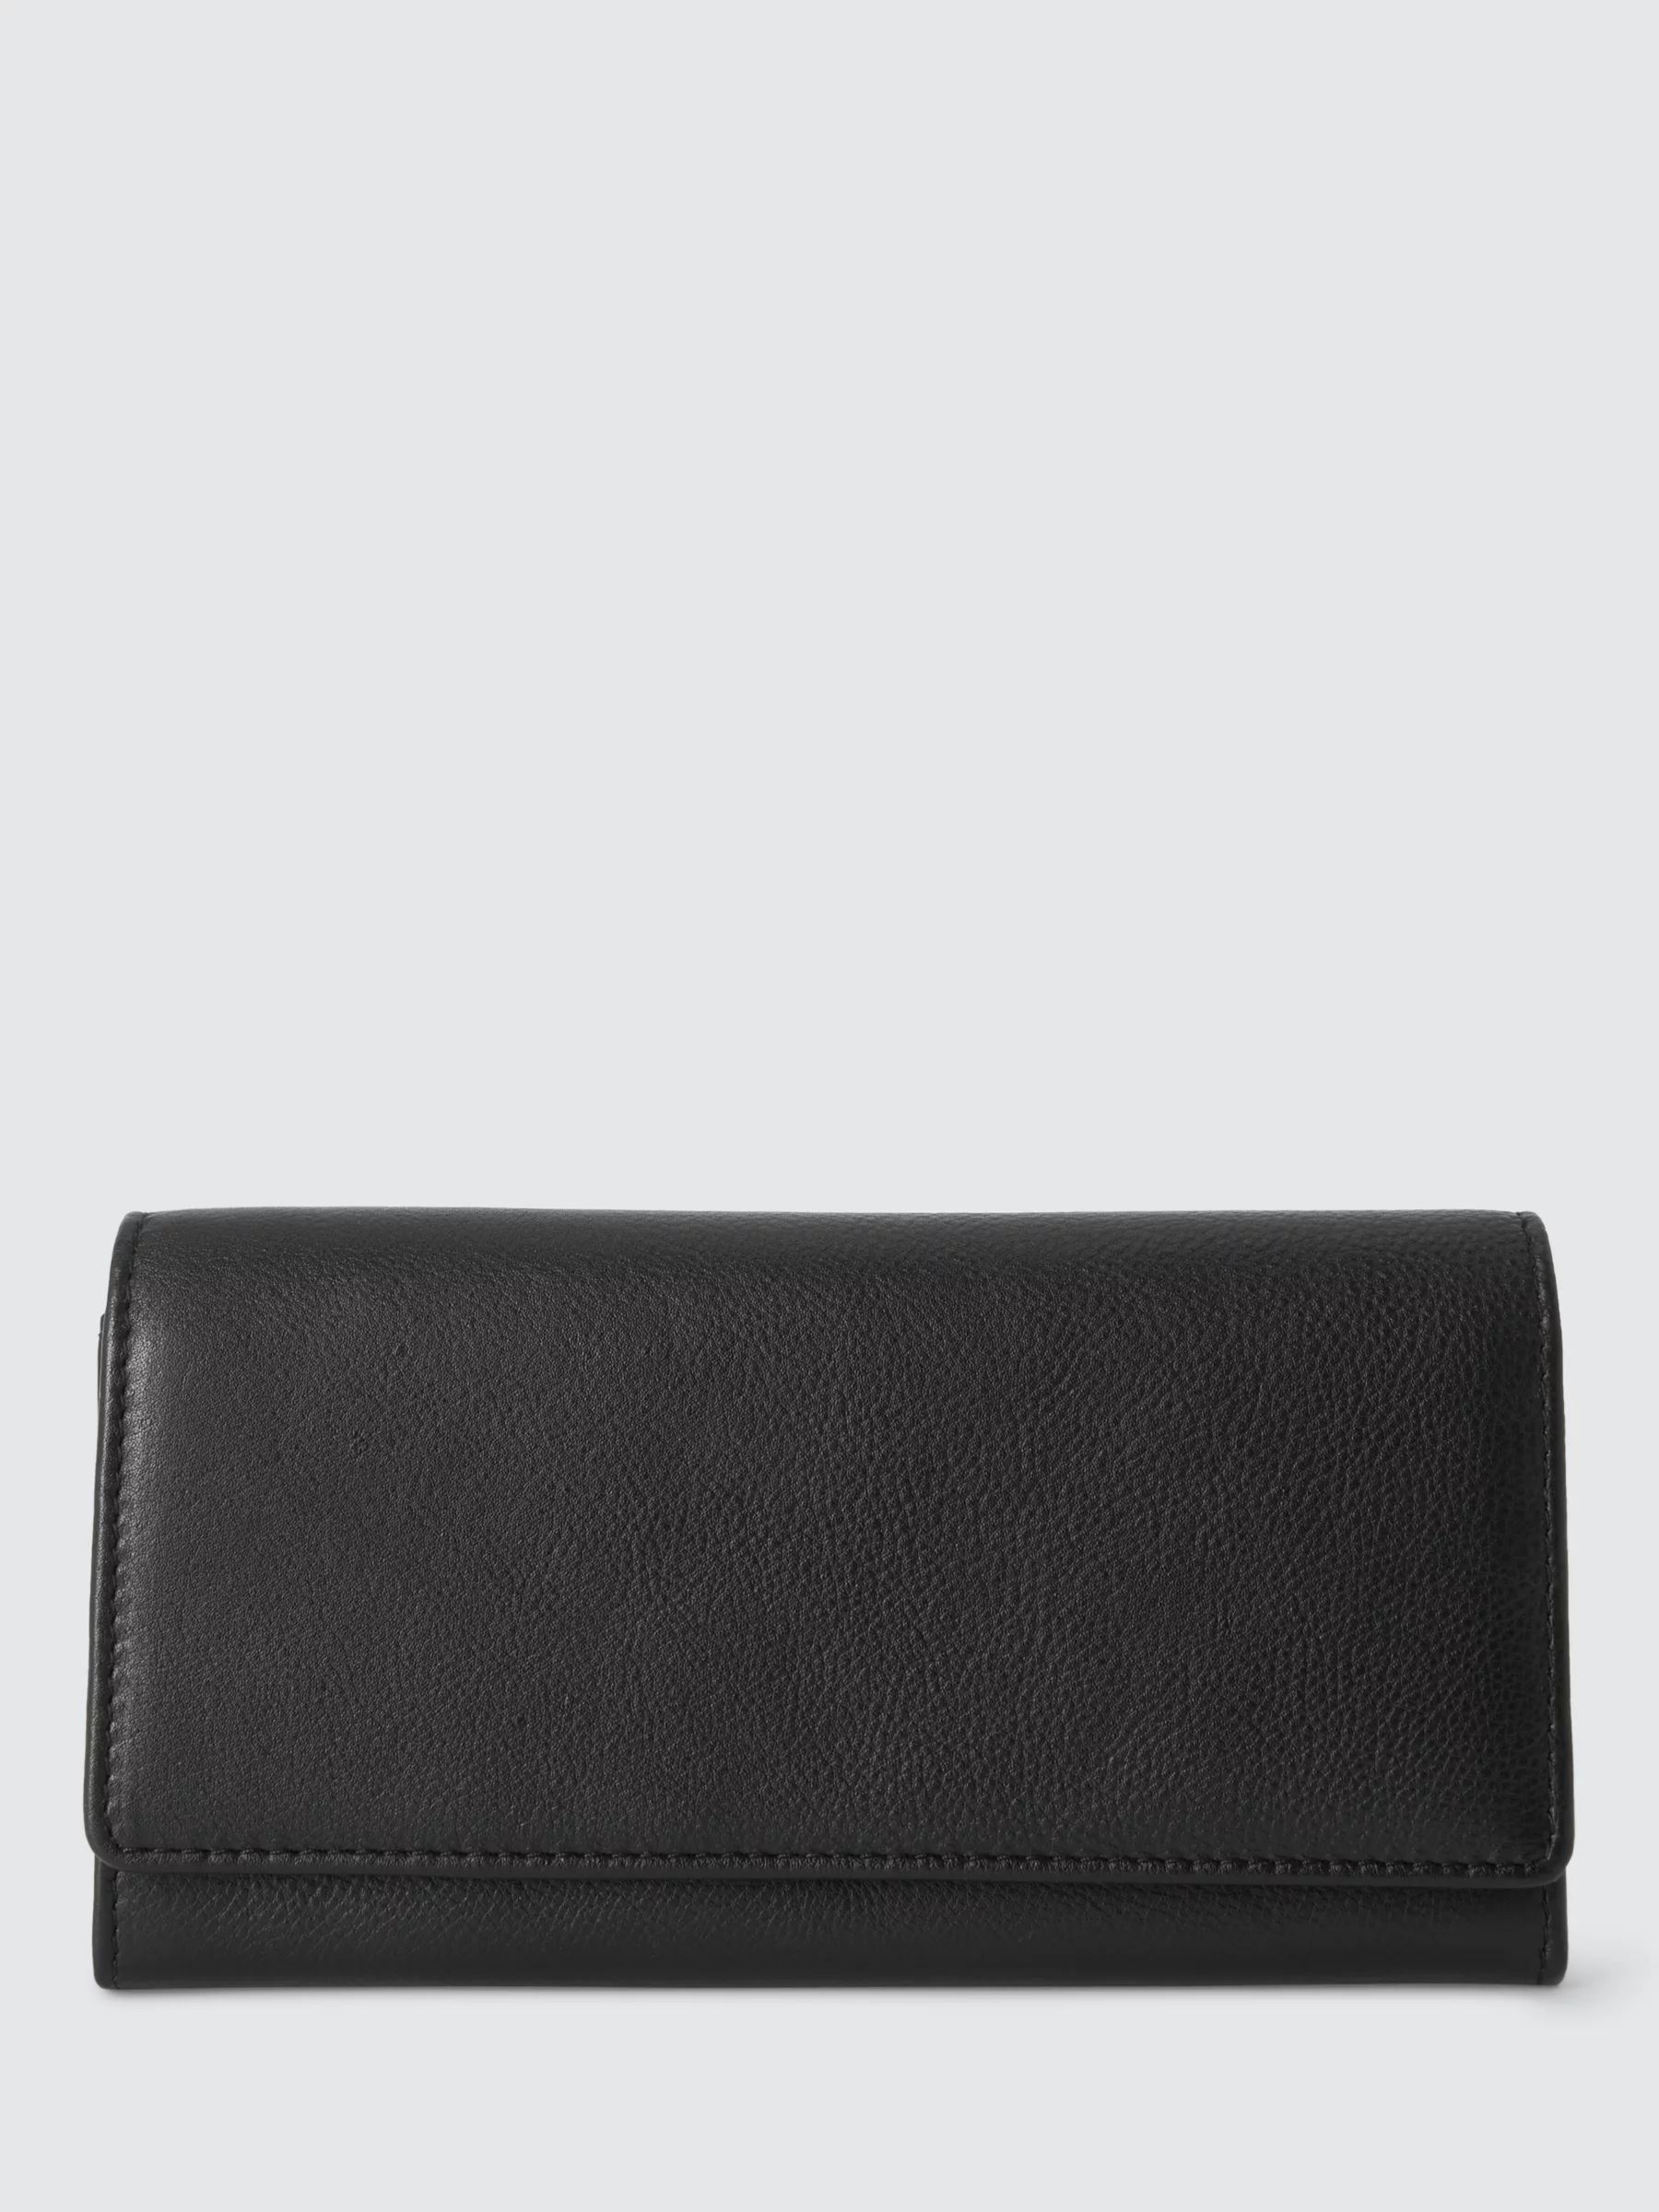 Shop John Lewis Ted Baker Womens Purses up to 50% Off | DealDoodle